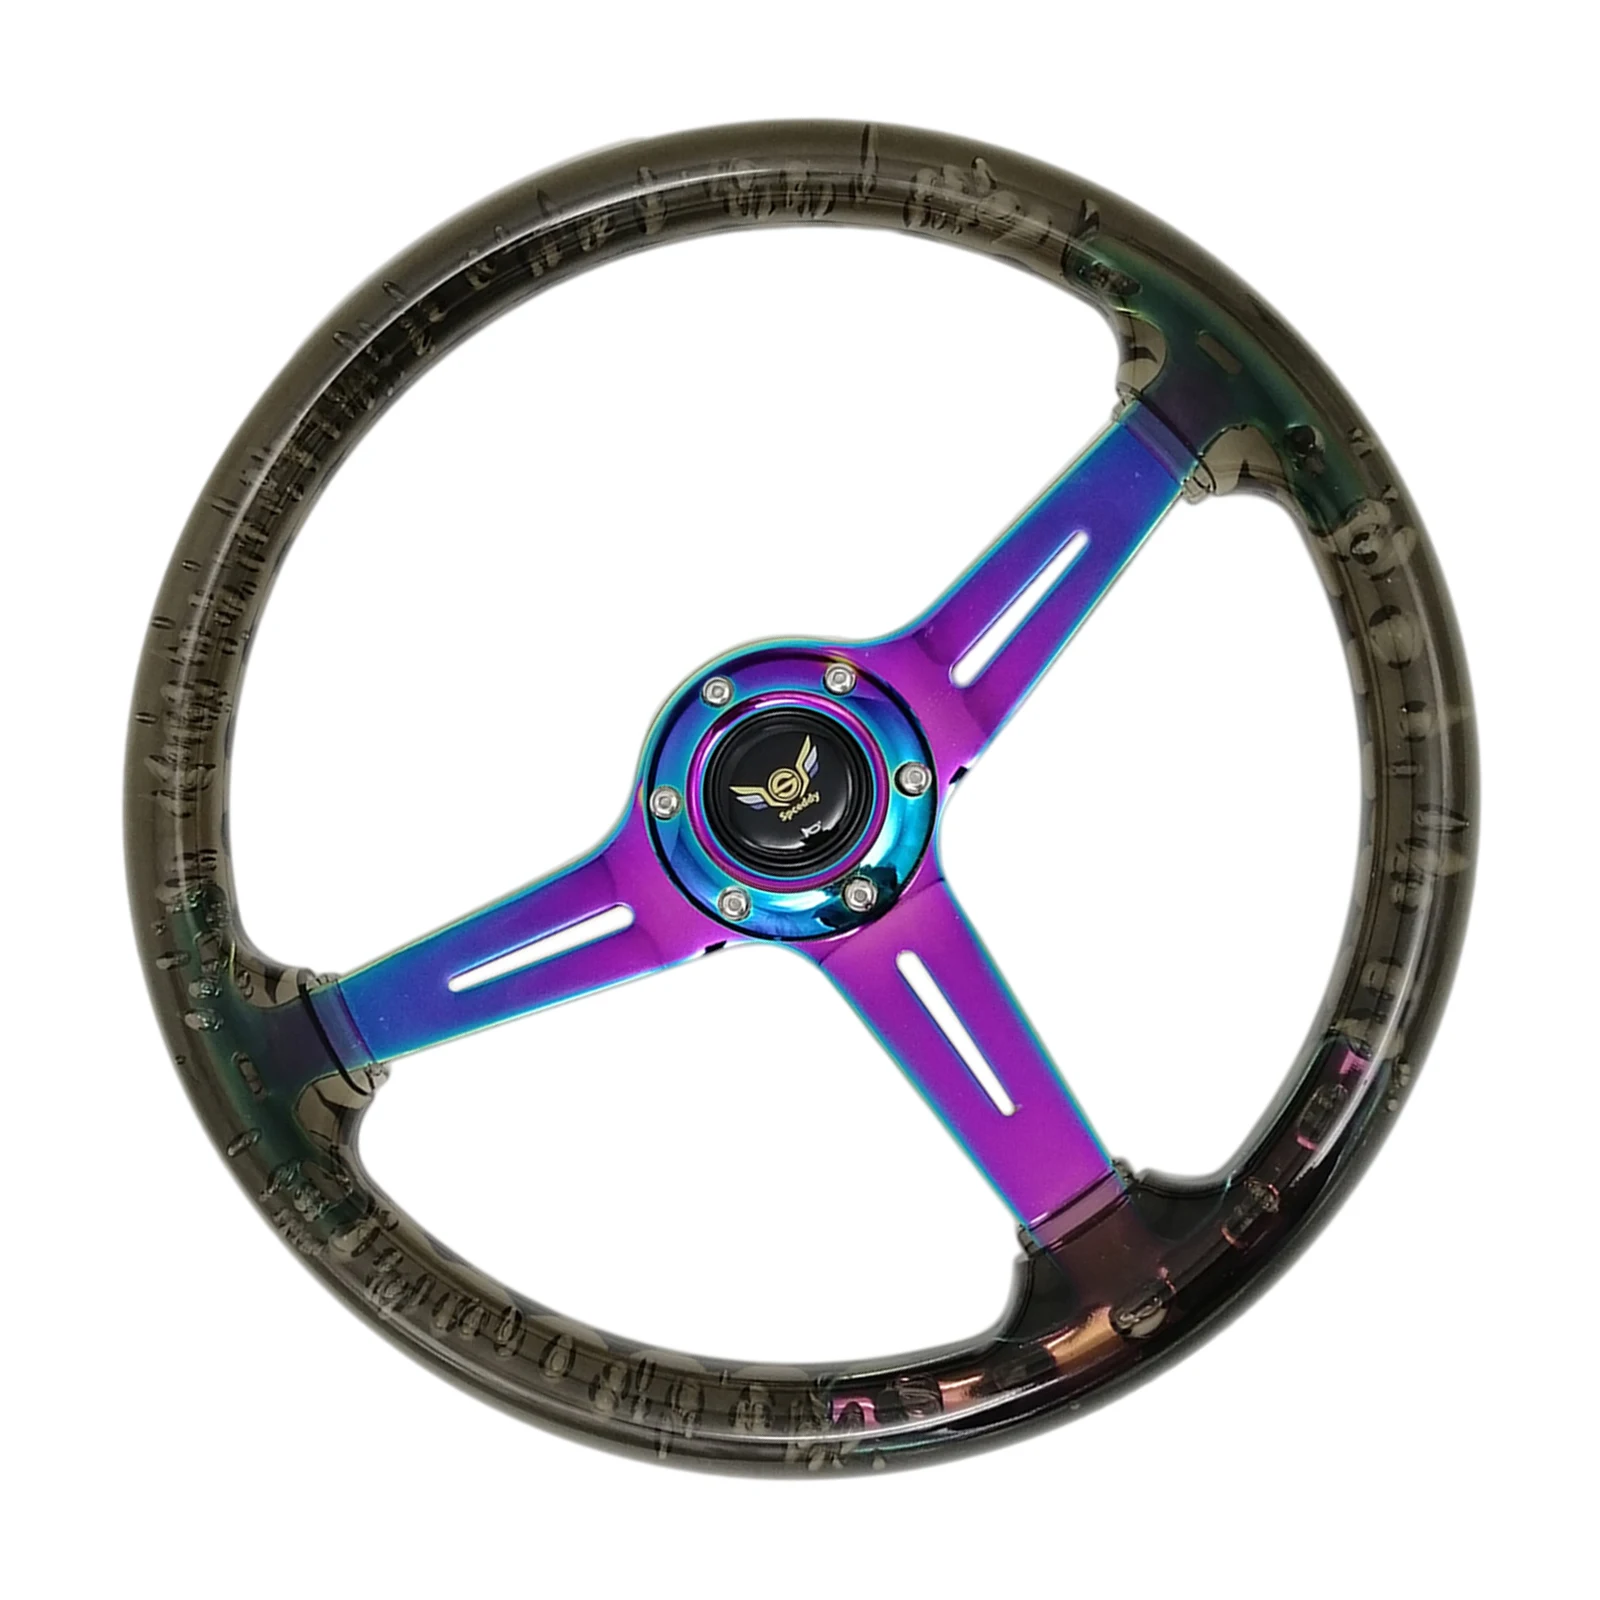 14 inch Acrylic Racing Steering Wheel for Race Car Modification Drifting Steering Wheel Accessories